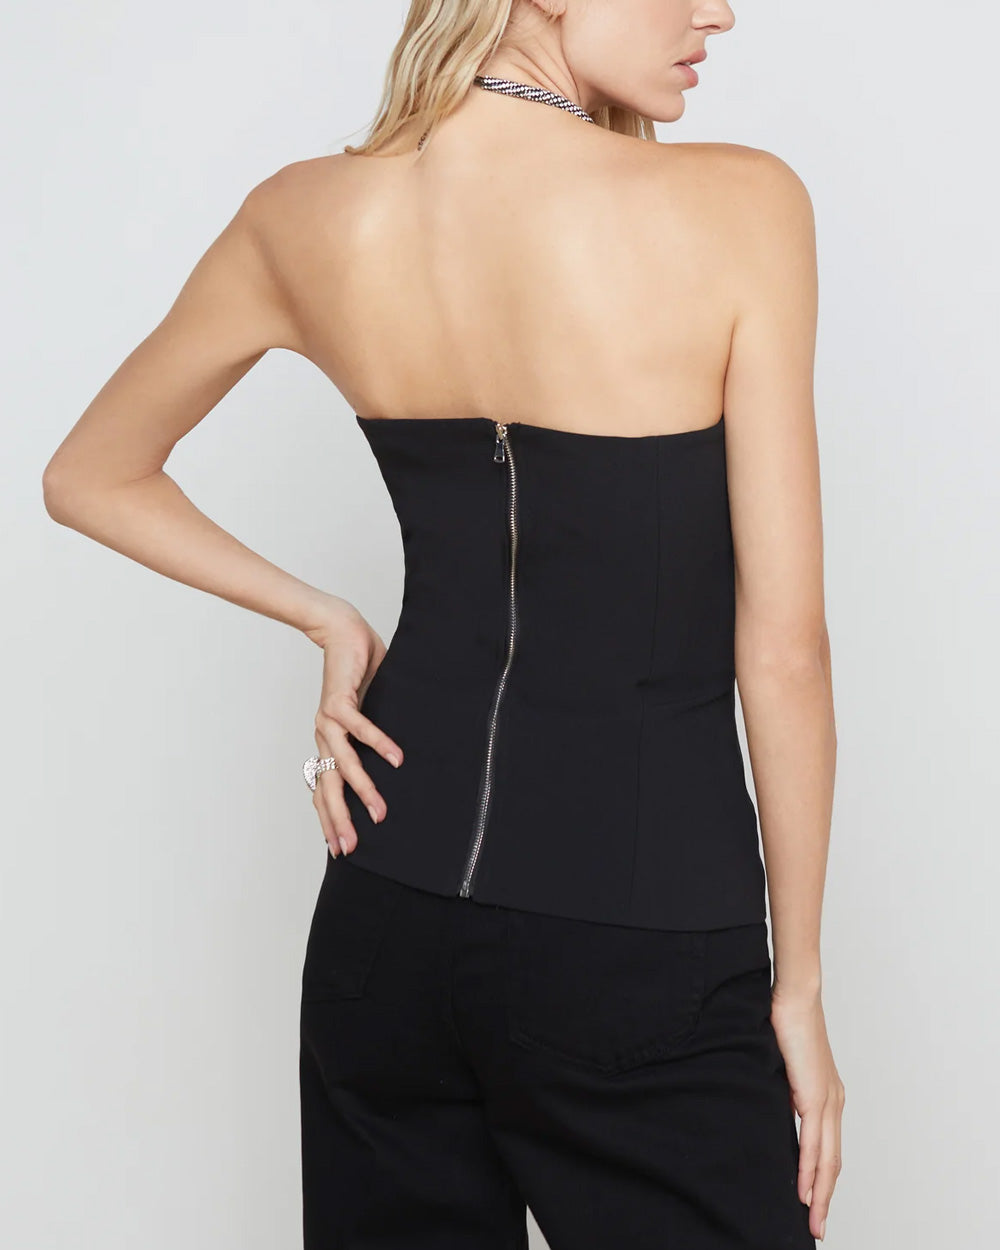 Black Strapless Fay Bustier